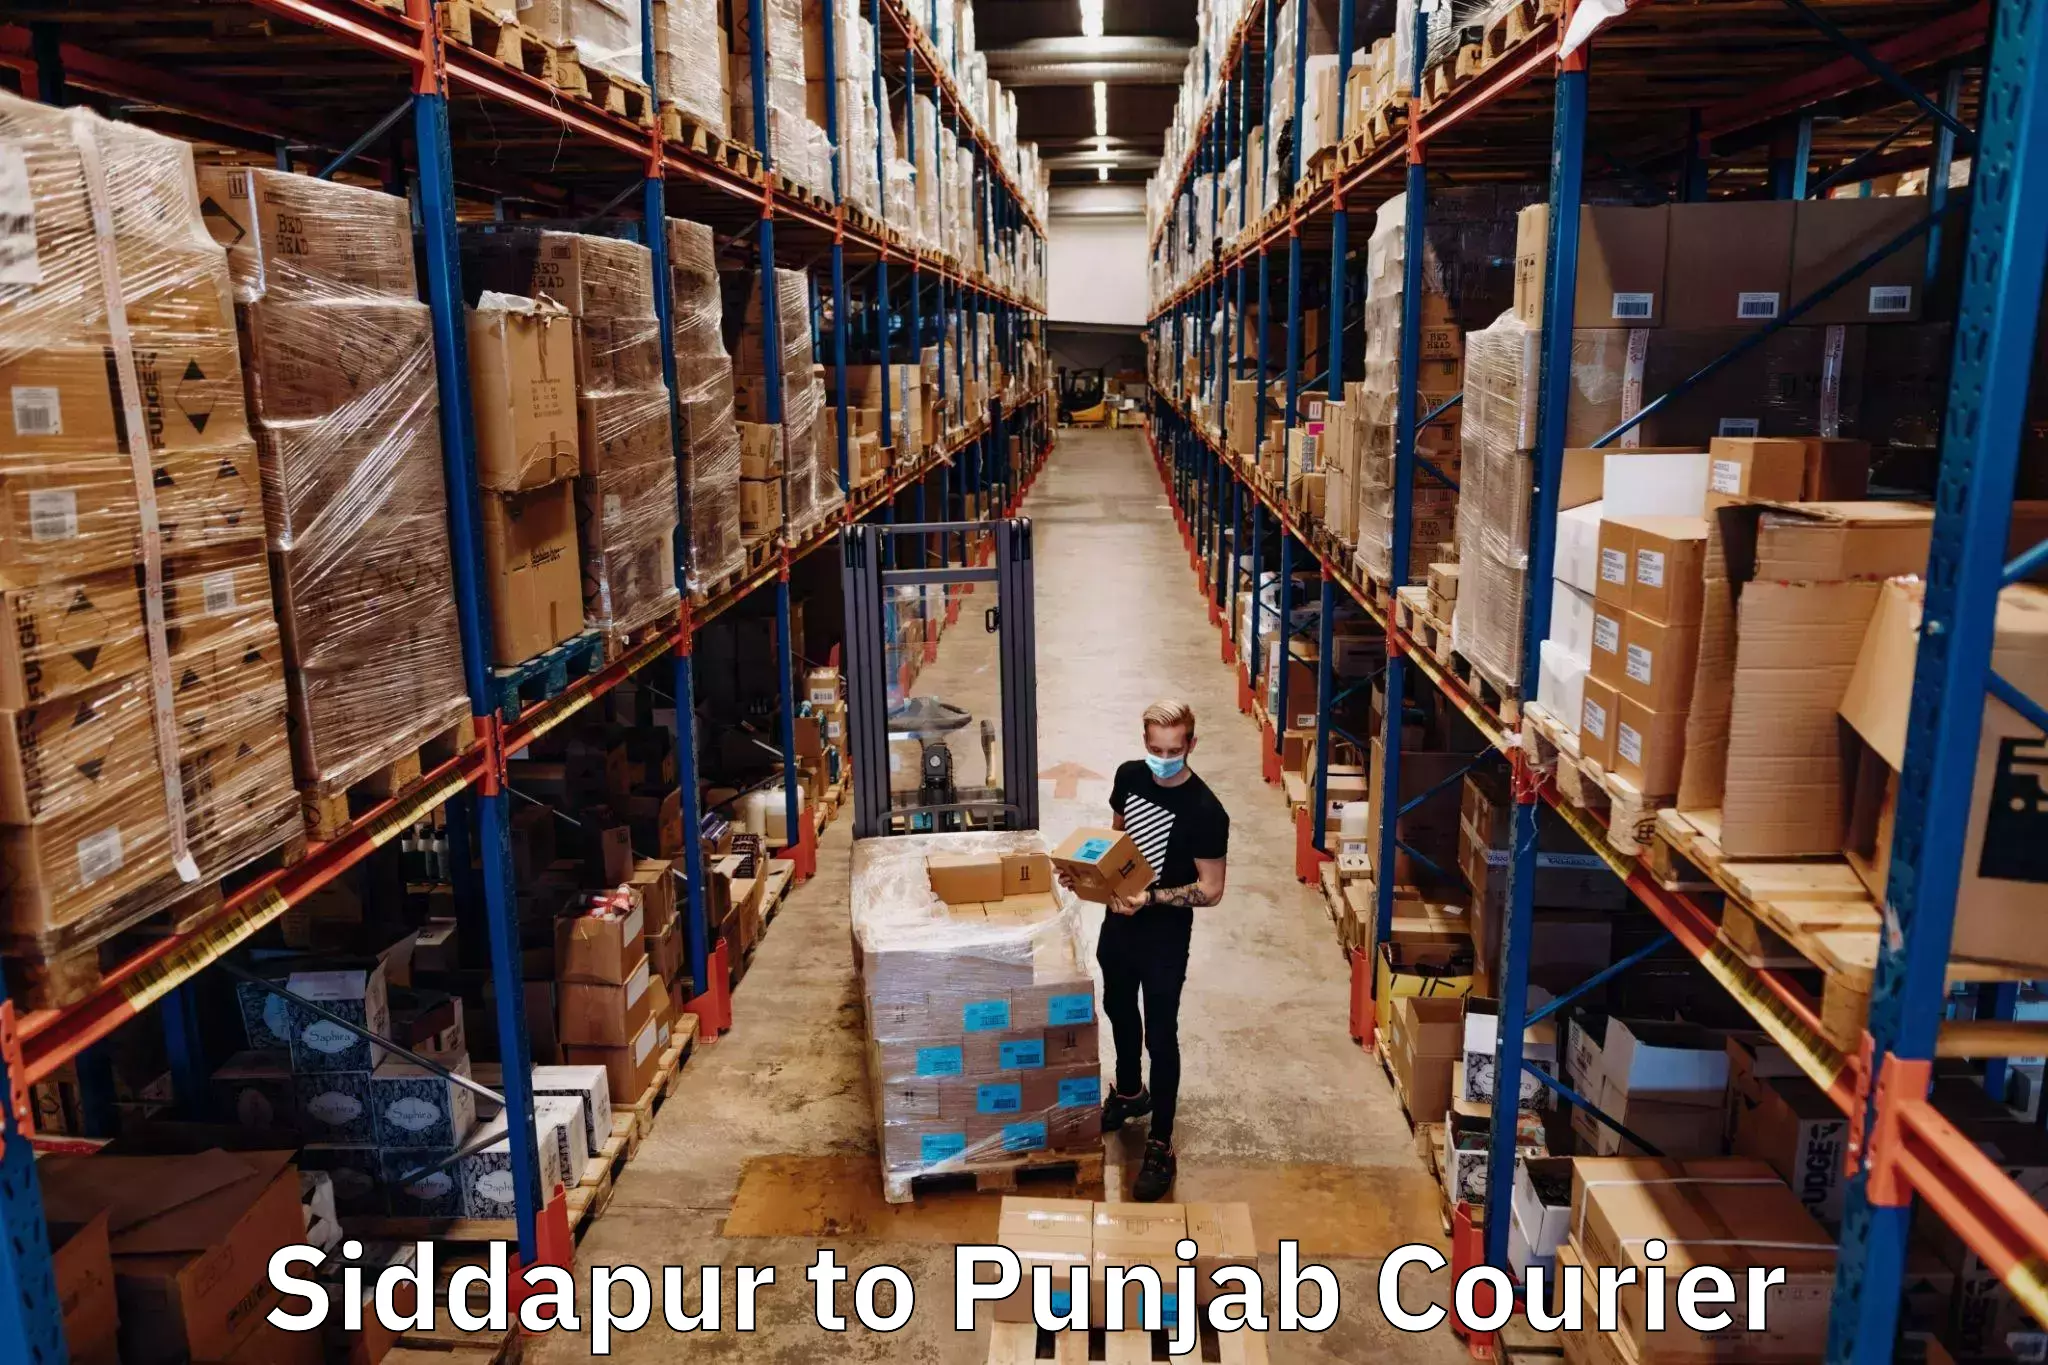 Subscription-based courier in Siddapur to Faridkot